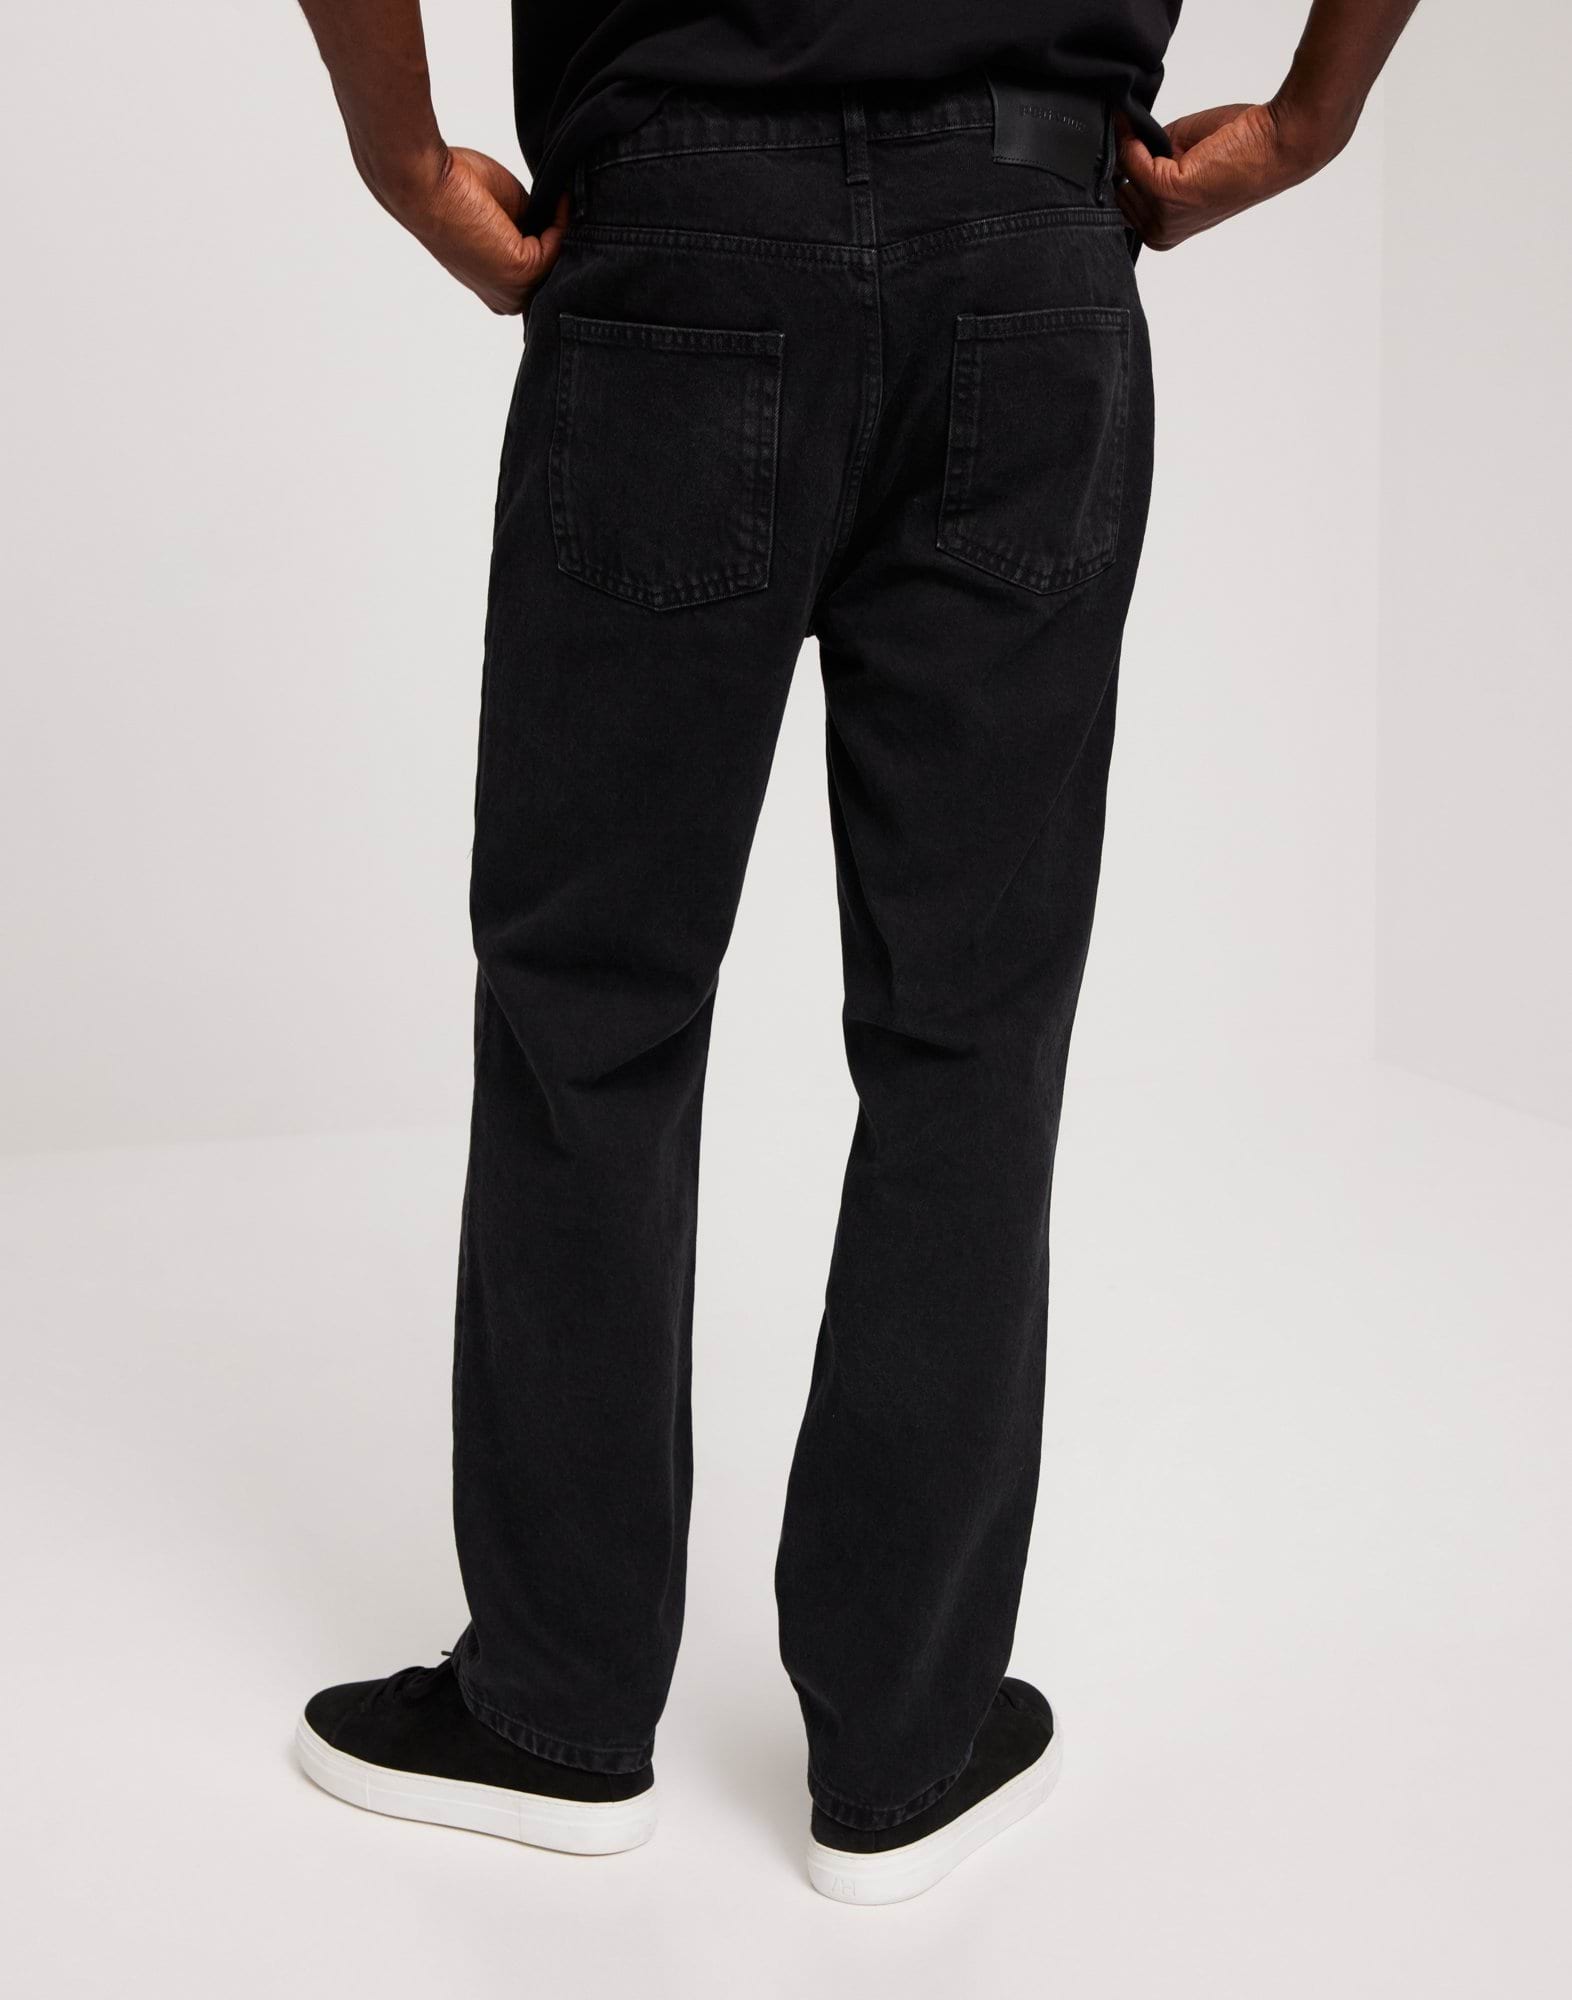 Tibo Baggy Jeans